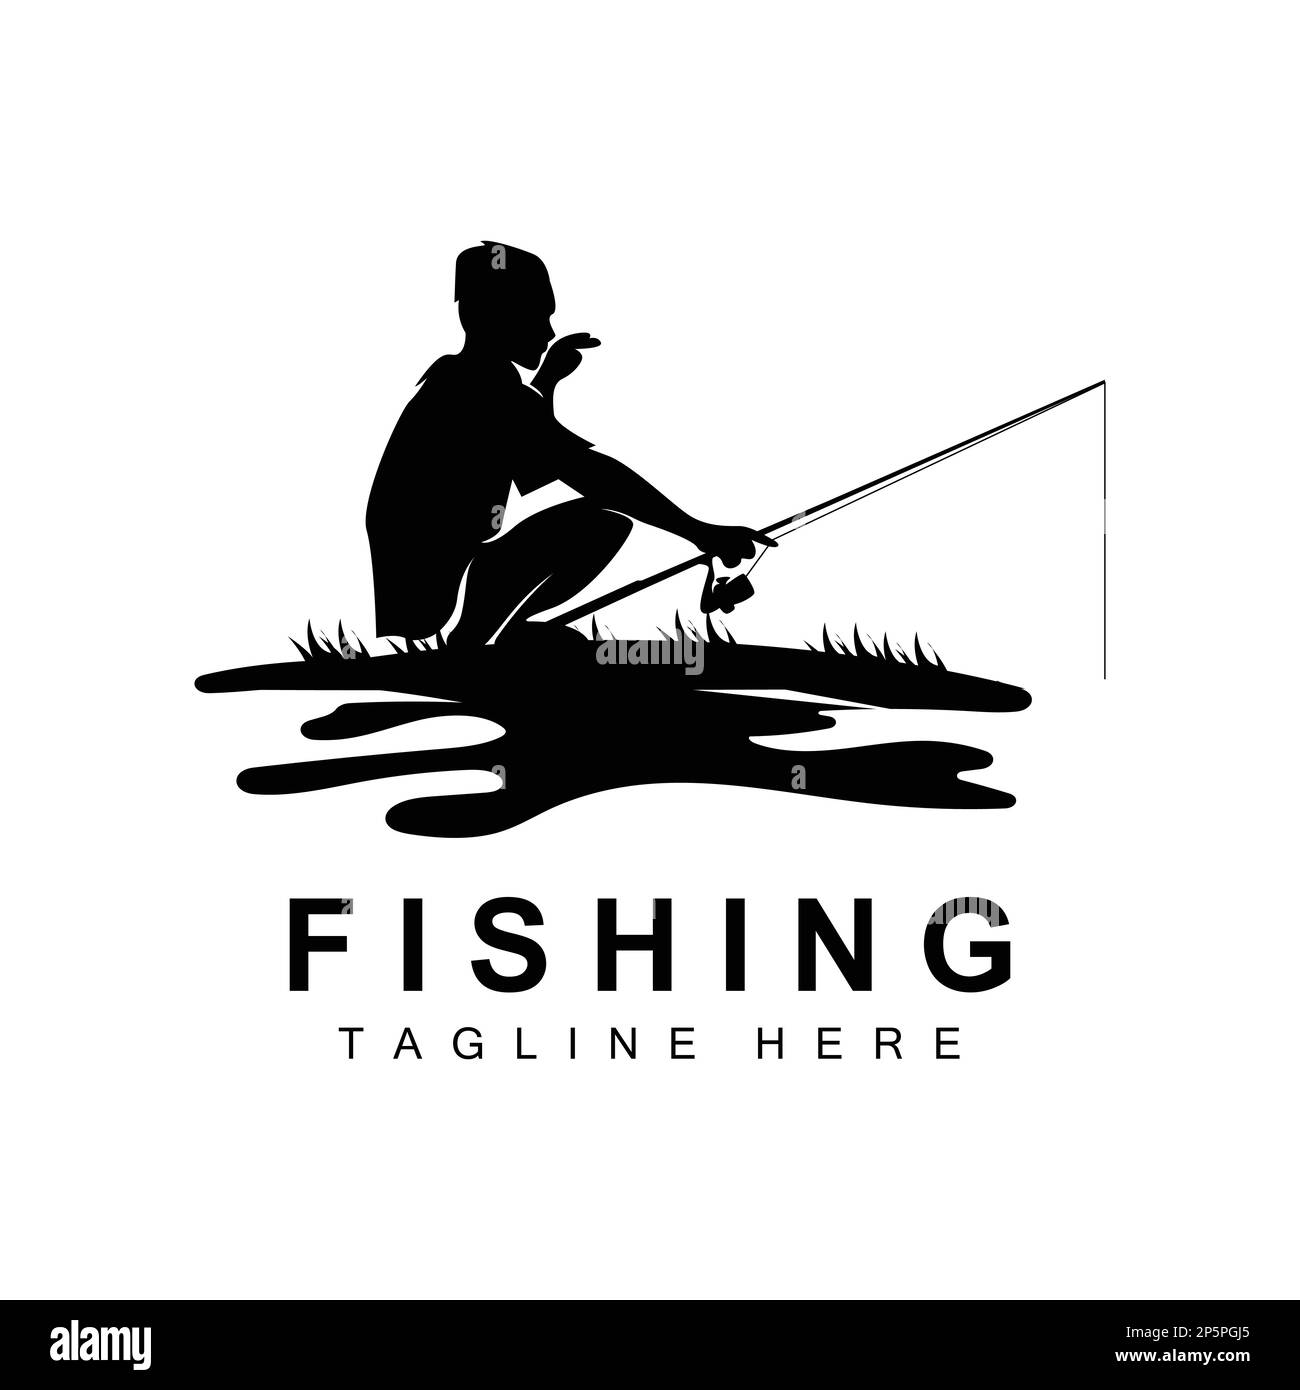 fishing logo icon vector, catch fish on the boat, outdoor sunset silhouette design Stock Vector